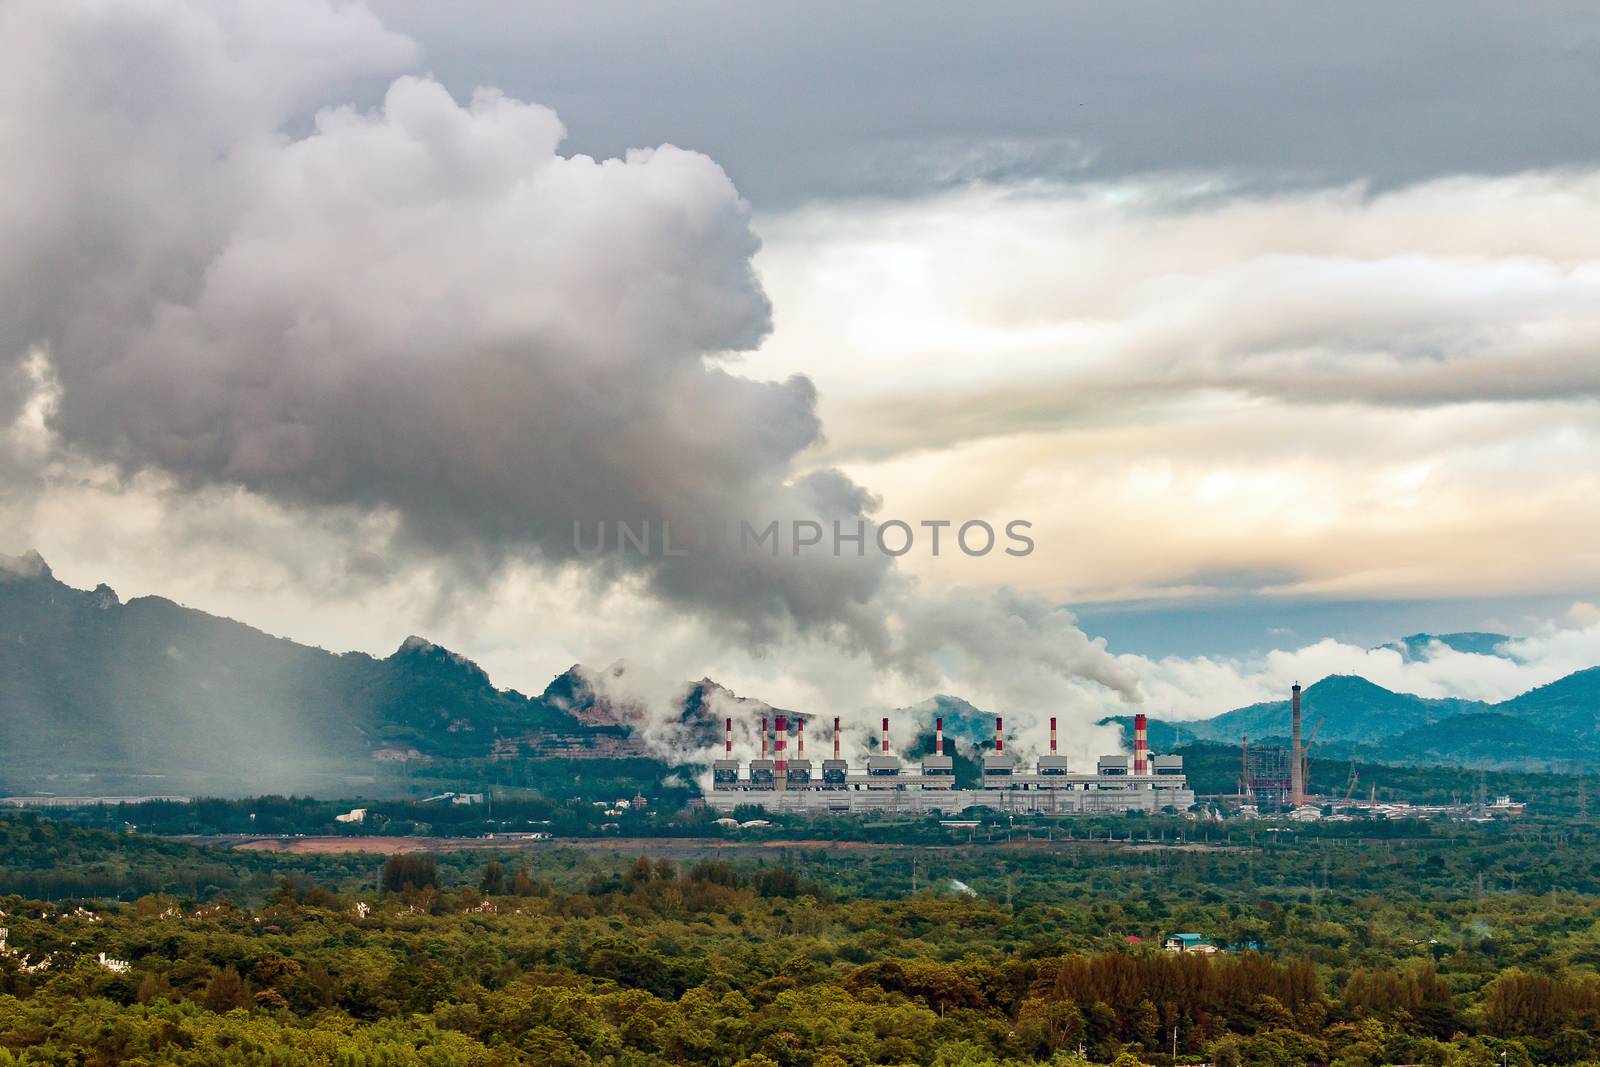 Mae Moh coal power plant in Lampang, Thailand by freedomnaruk